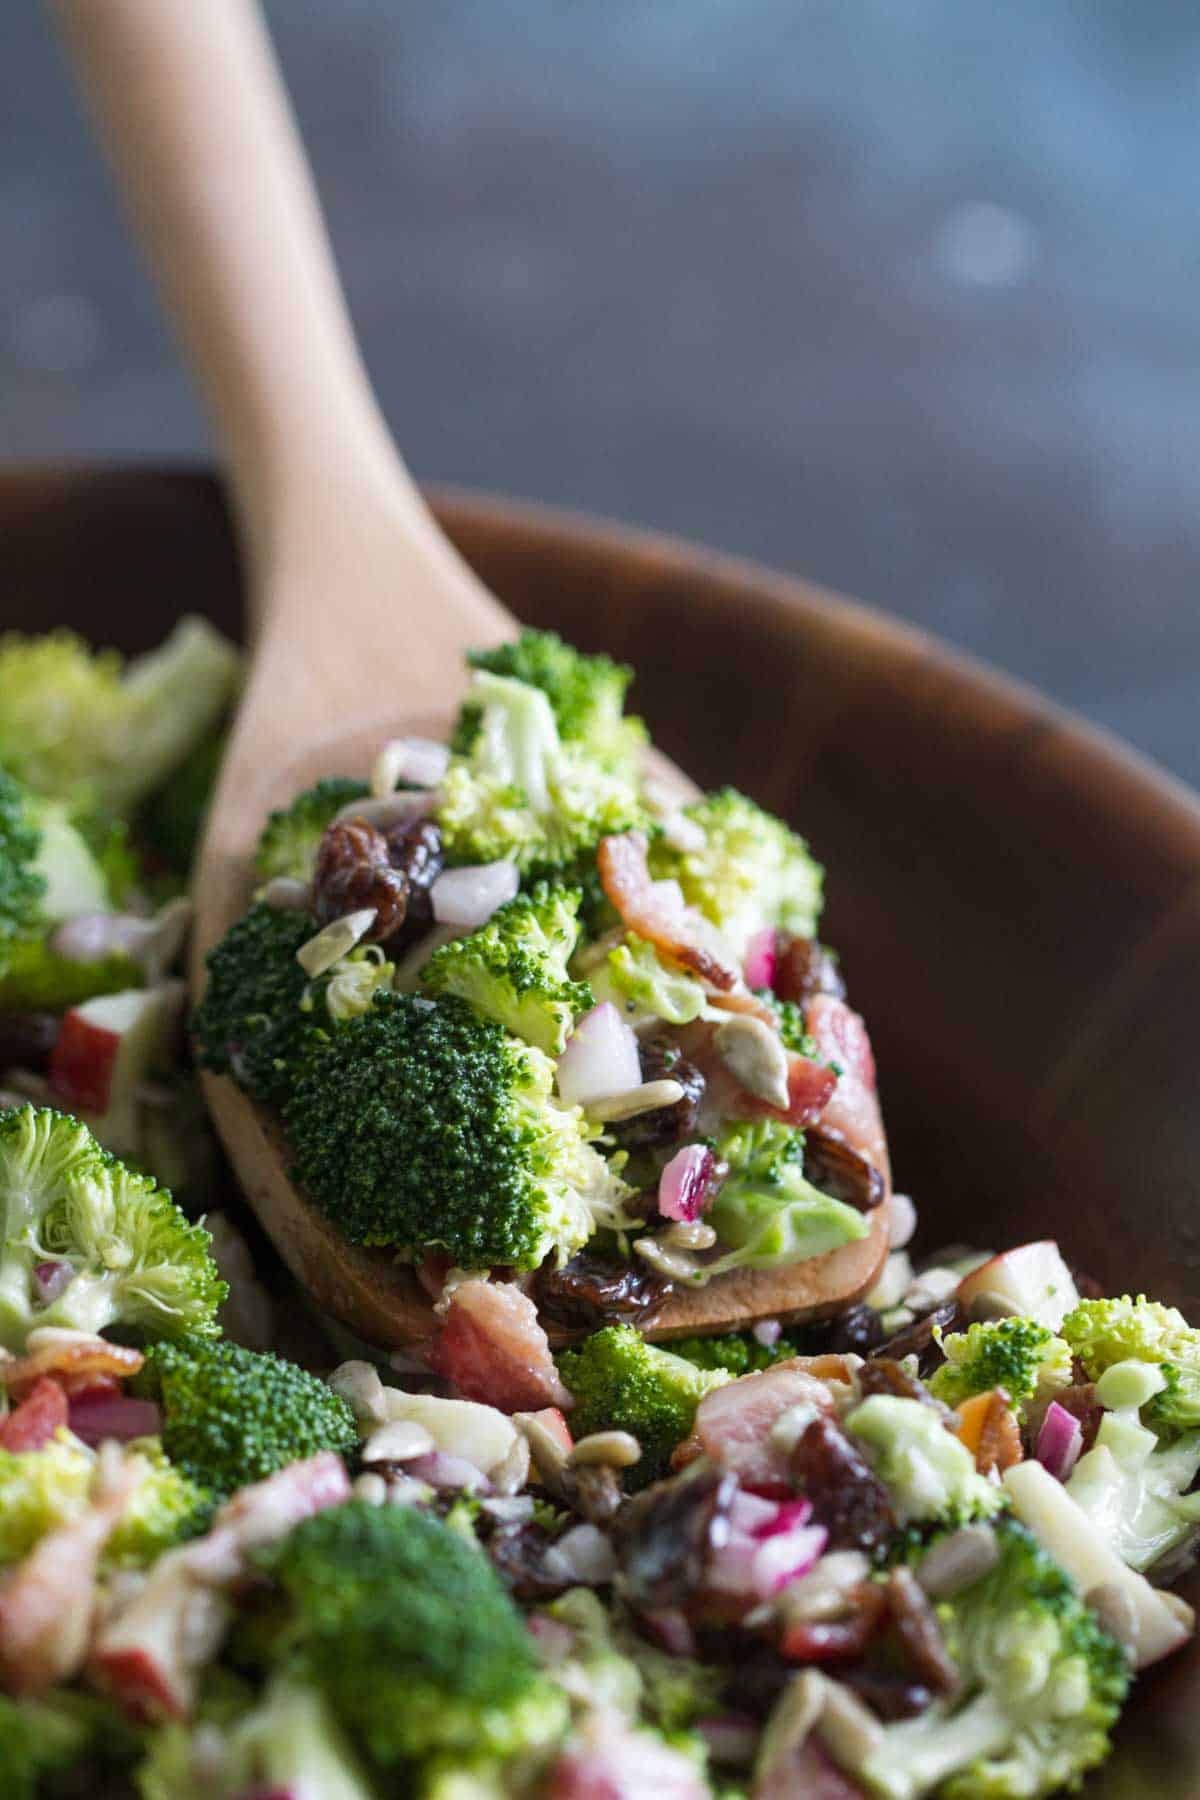 scoop full of Broccoli Salad with Bacon